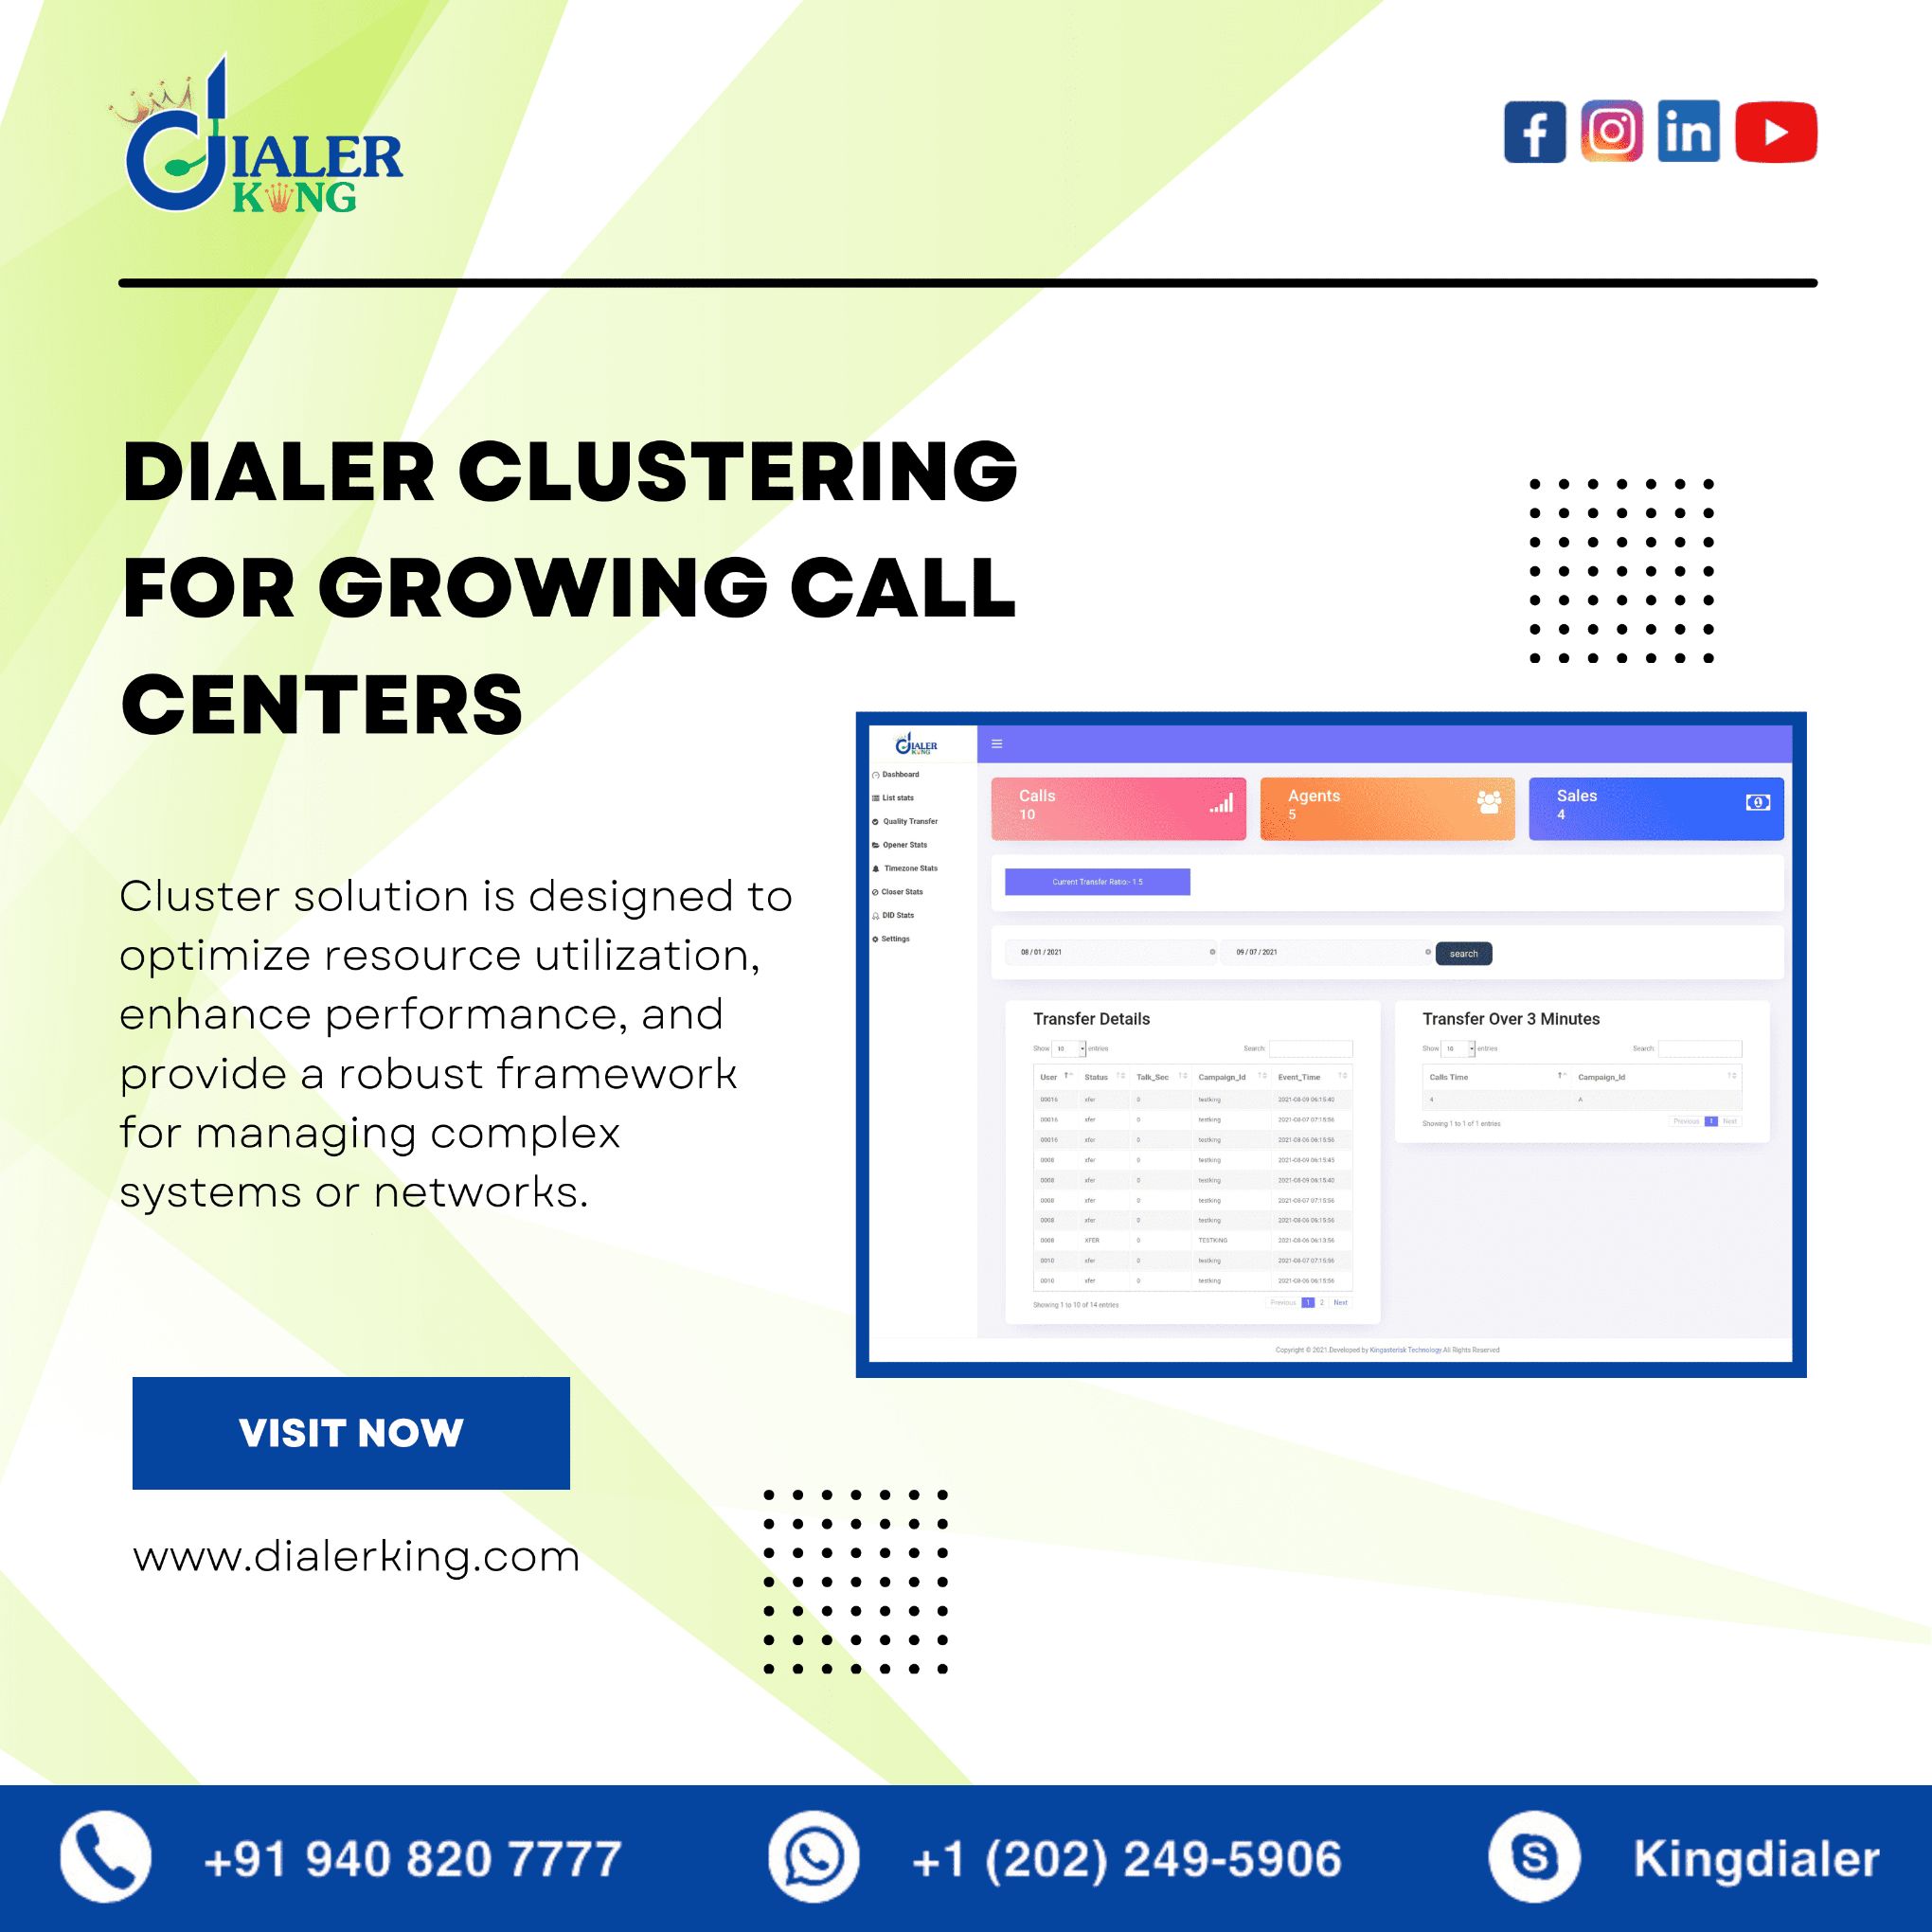  Using cluster solutions to revolutionize call centers